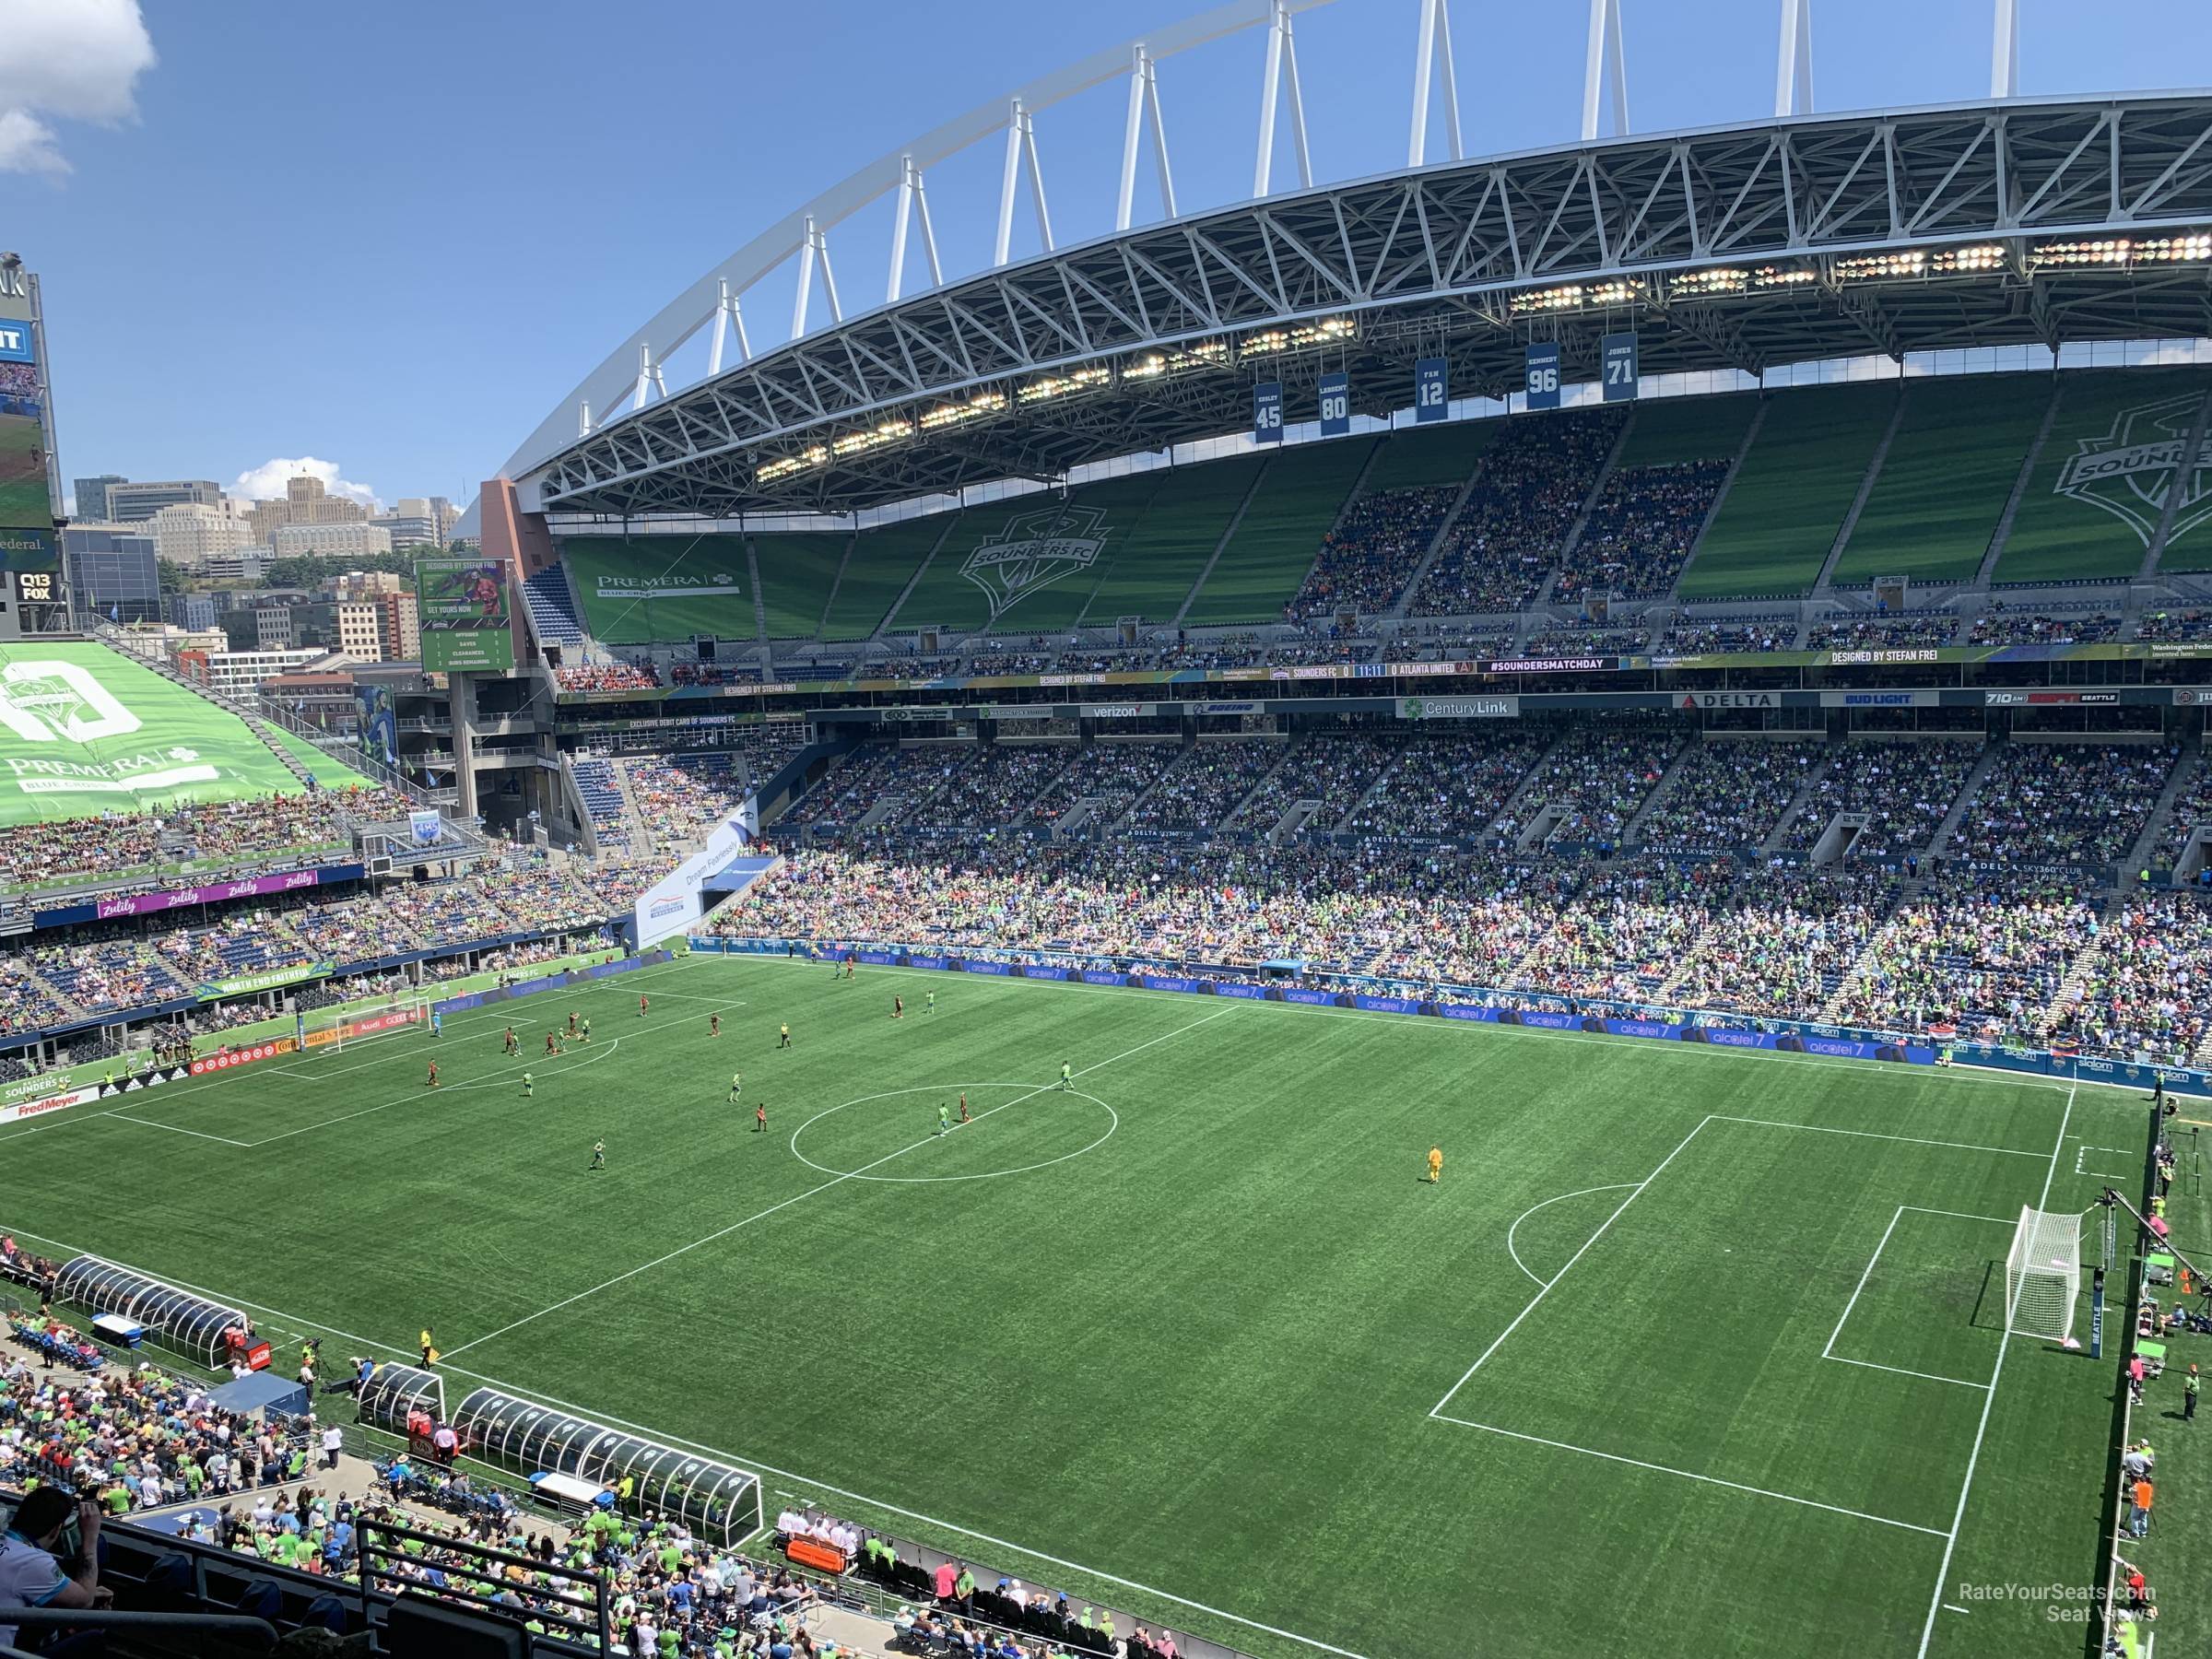 Soccer Seat View From Section 330, Row E. section 330, row e seat view for ...